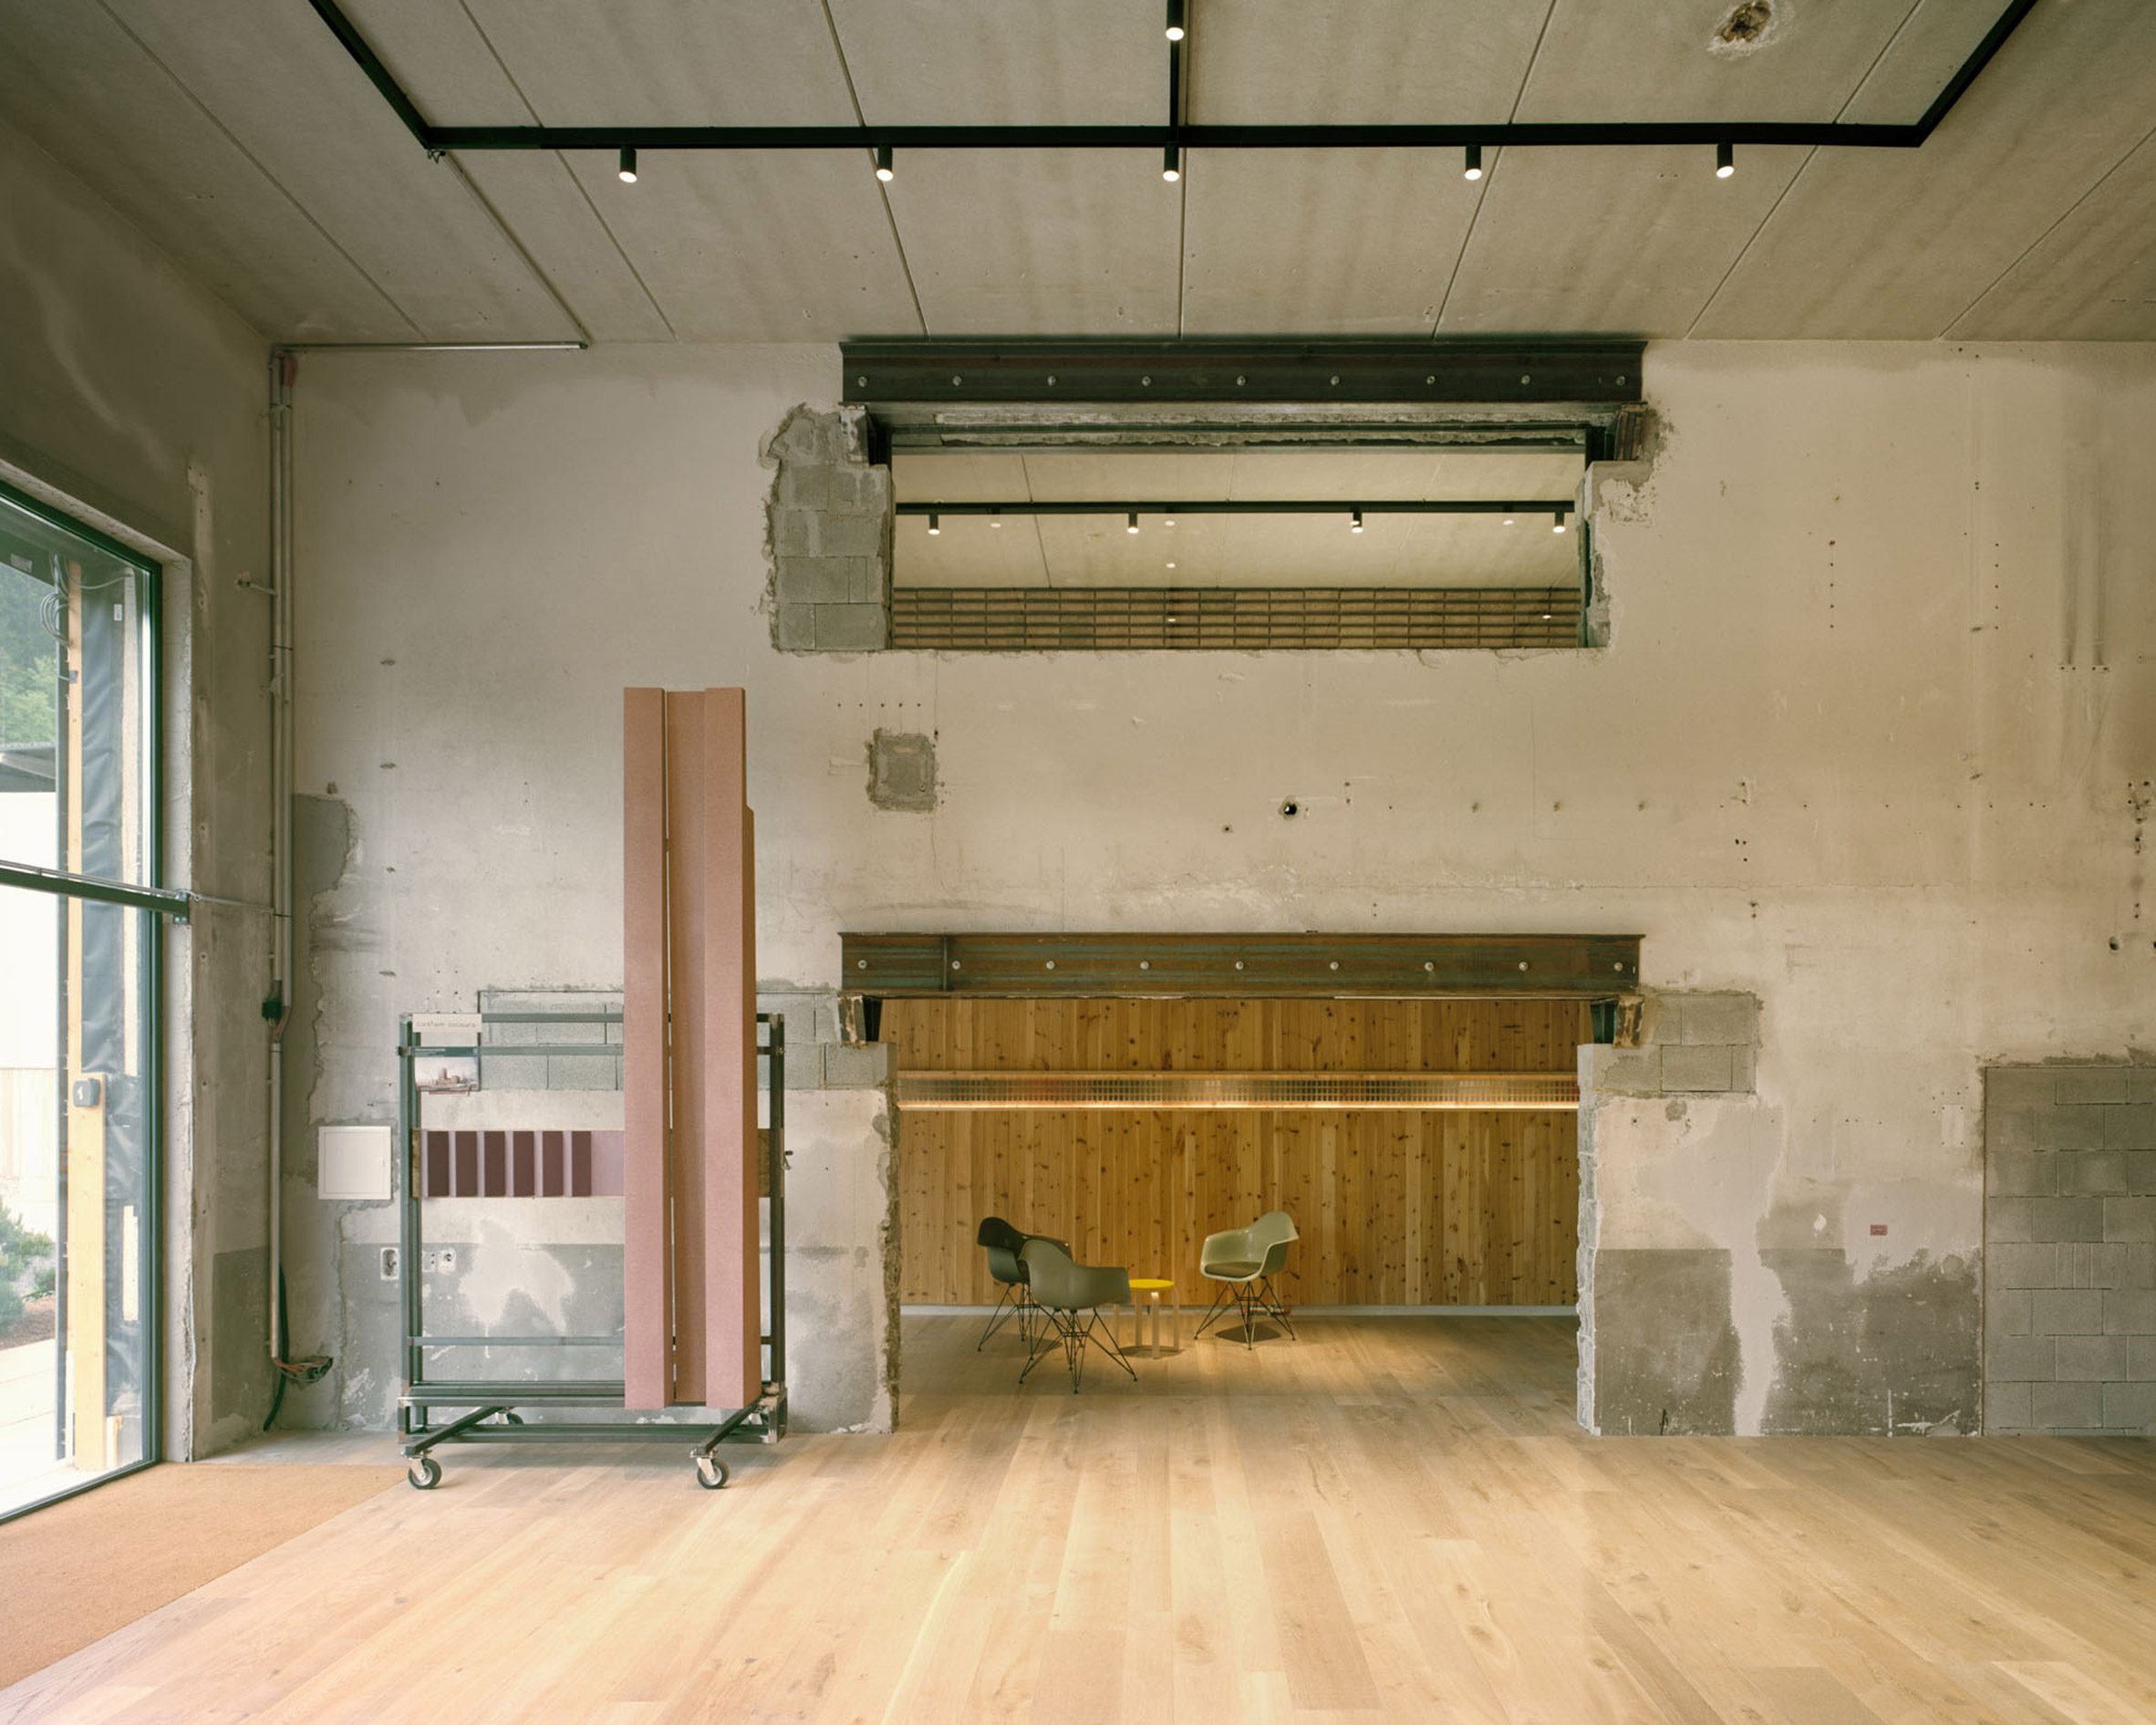 Interior image of a lobby area at the Rieder headquarters